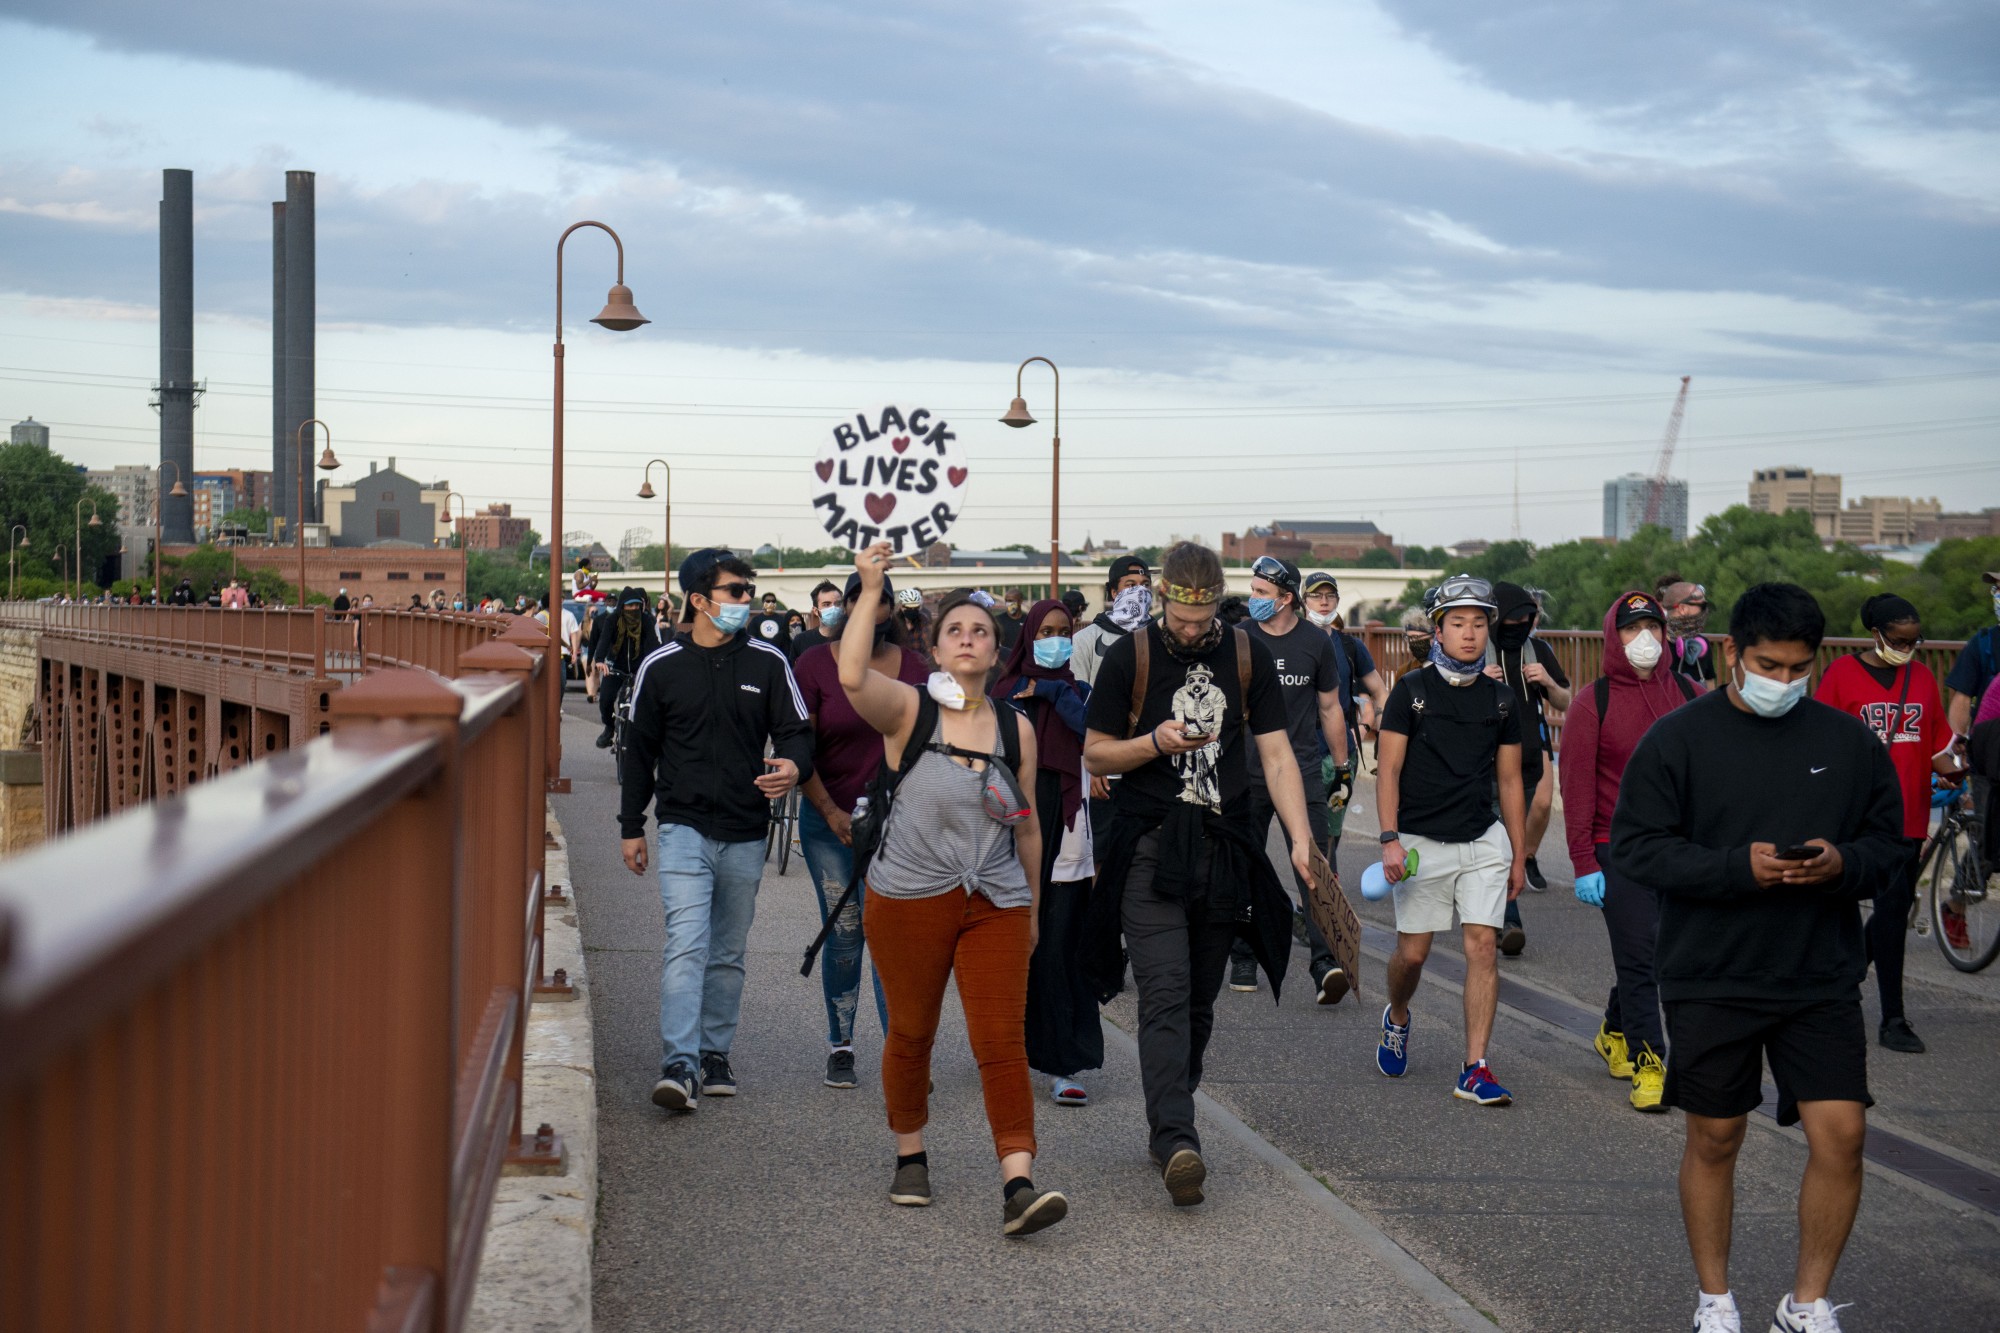 Demonstrators make their way through parts of campus as curfew nears, eventually crossing the Stone Arch Bridge and into downtown on Sunday, May 31.